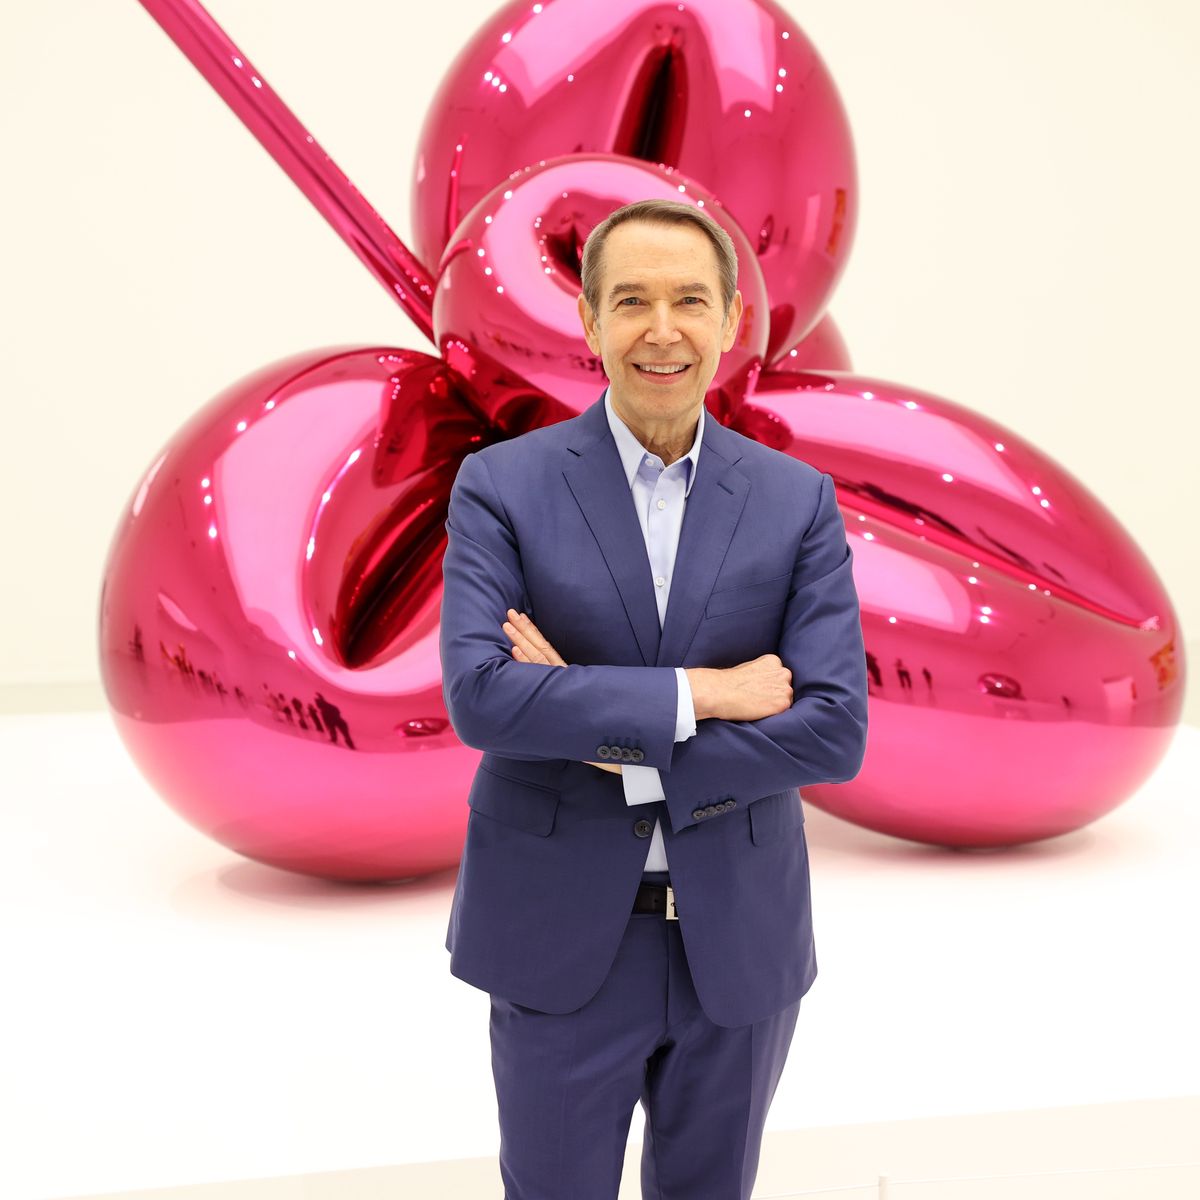 Interview: at home with artist Jeff Koons